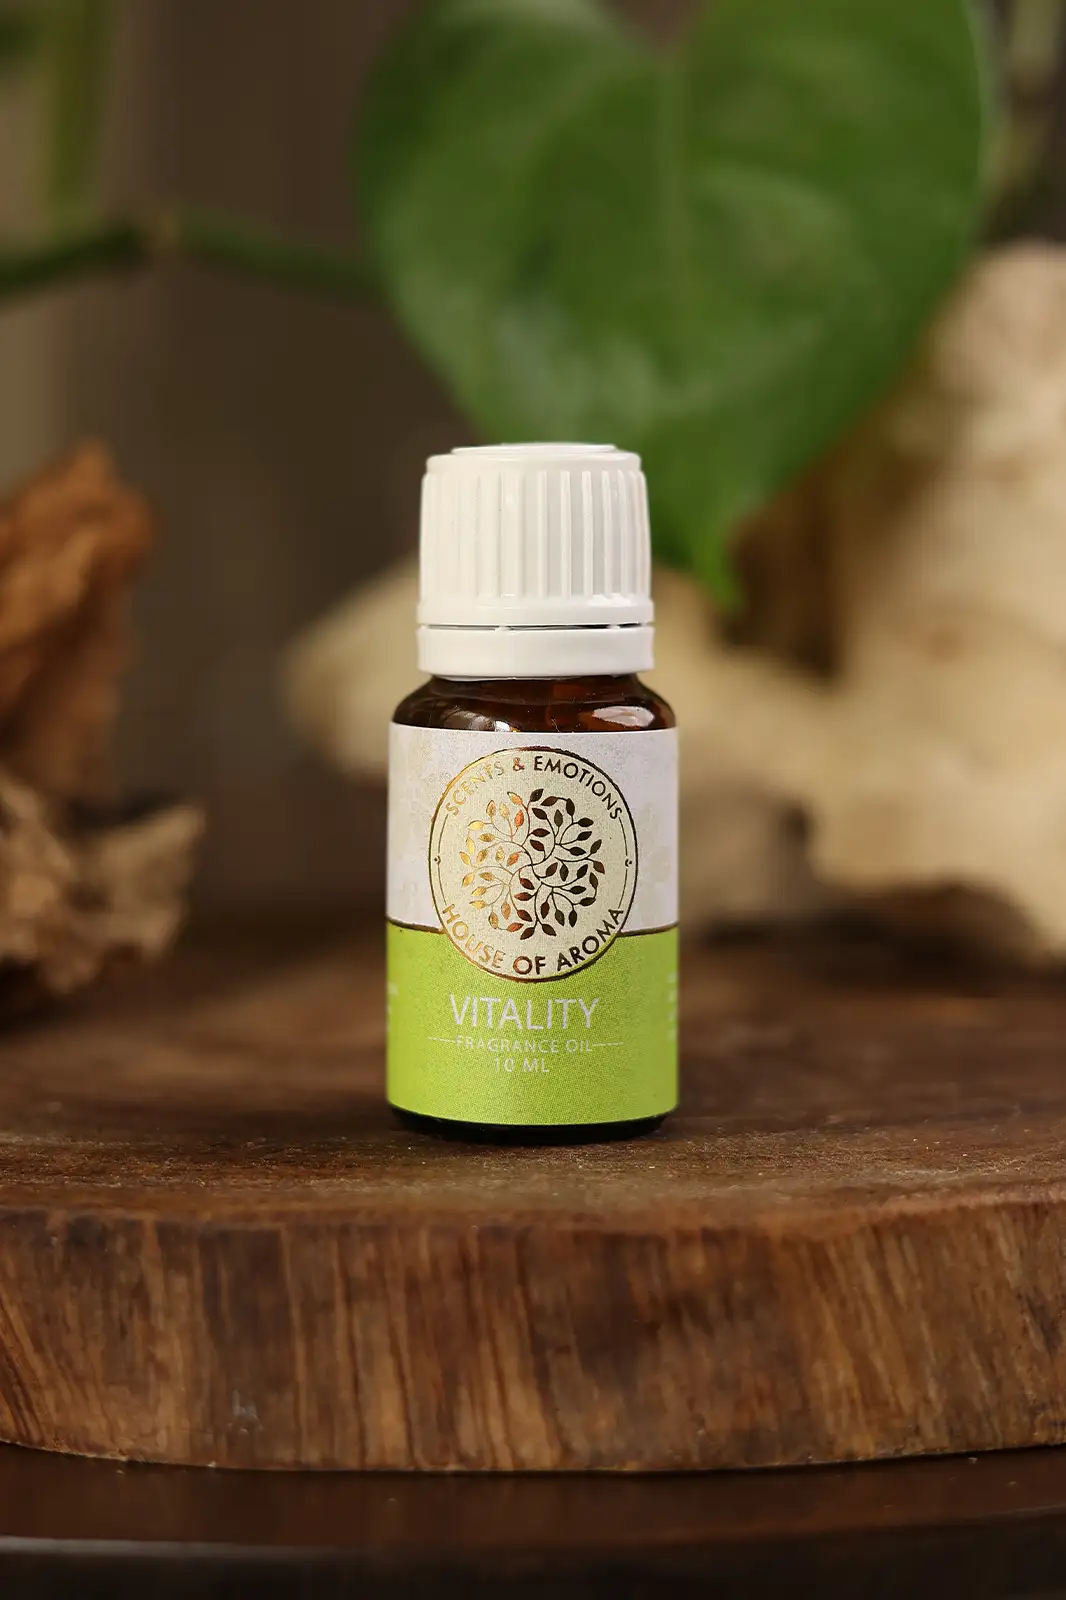 Fragrance Oil, Aroma oil, Synthetic oils, Fragrance oil for candles, oil for diffusers, Aromatic oil, Candle oil, Aromatherapy oil, oil manufacturers, House of Aroma, vitality fragrance oil, Vitality vanilla fragrance benefits, vitality frankincense oil, vitality oil, vitality aroma oil, vitality oil uses, vitality oil benefits, fragrance oil for perfume